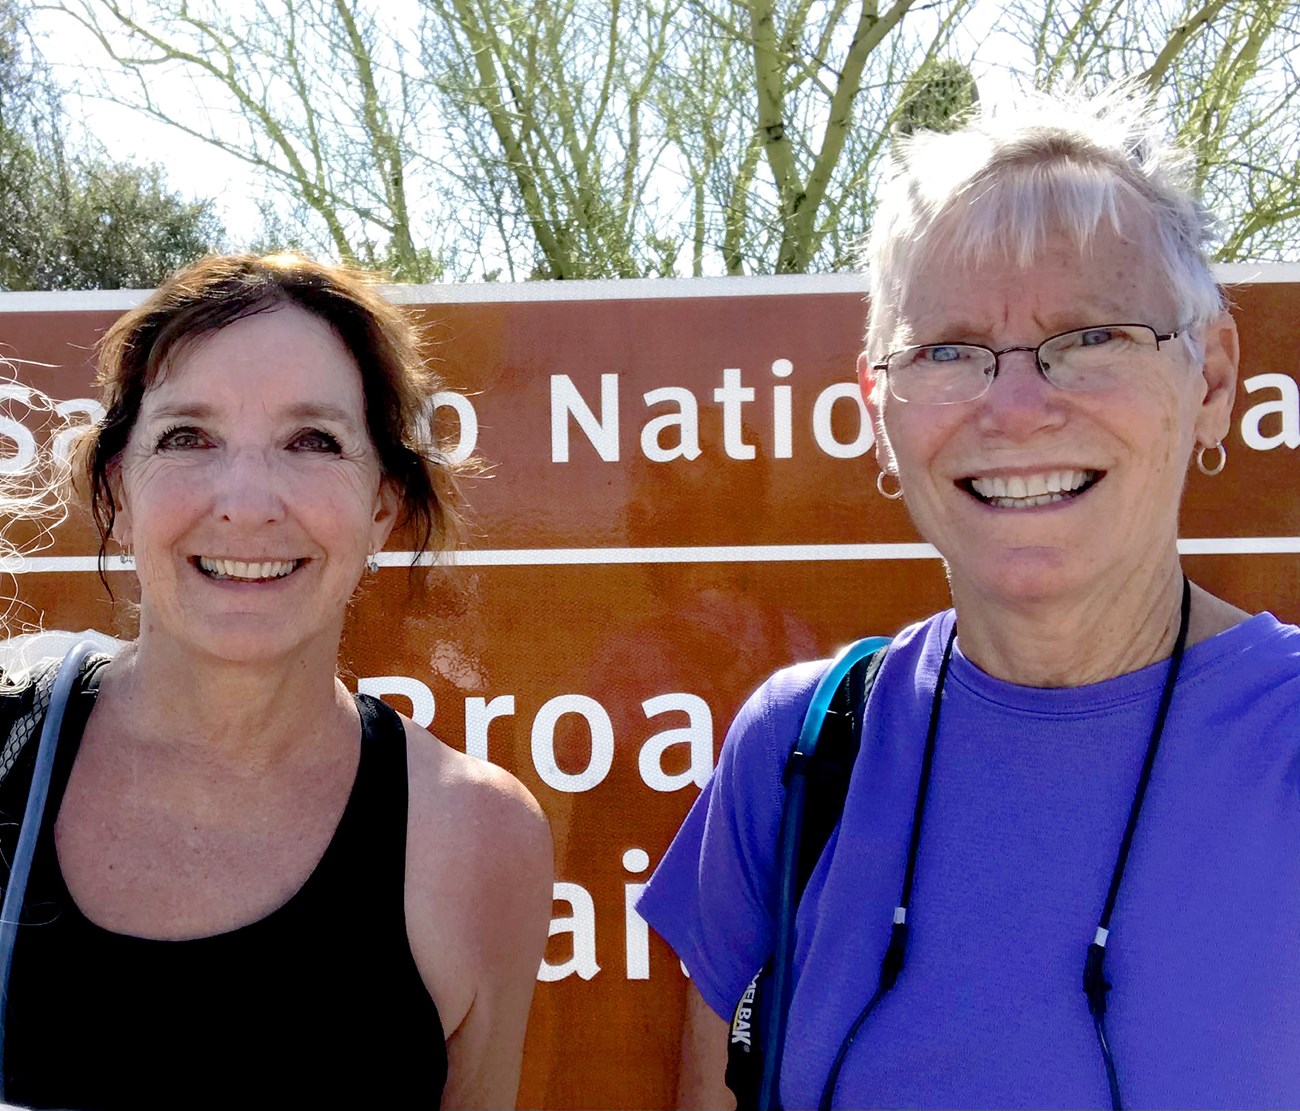 Two smiling women stand in front of a national park sign